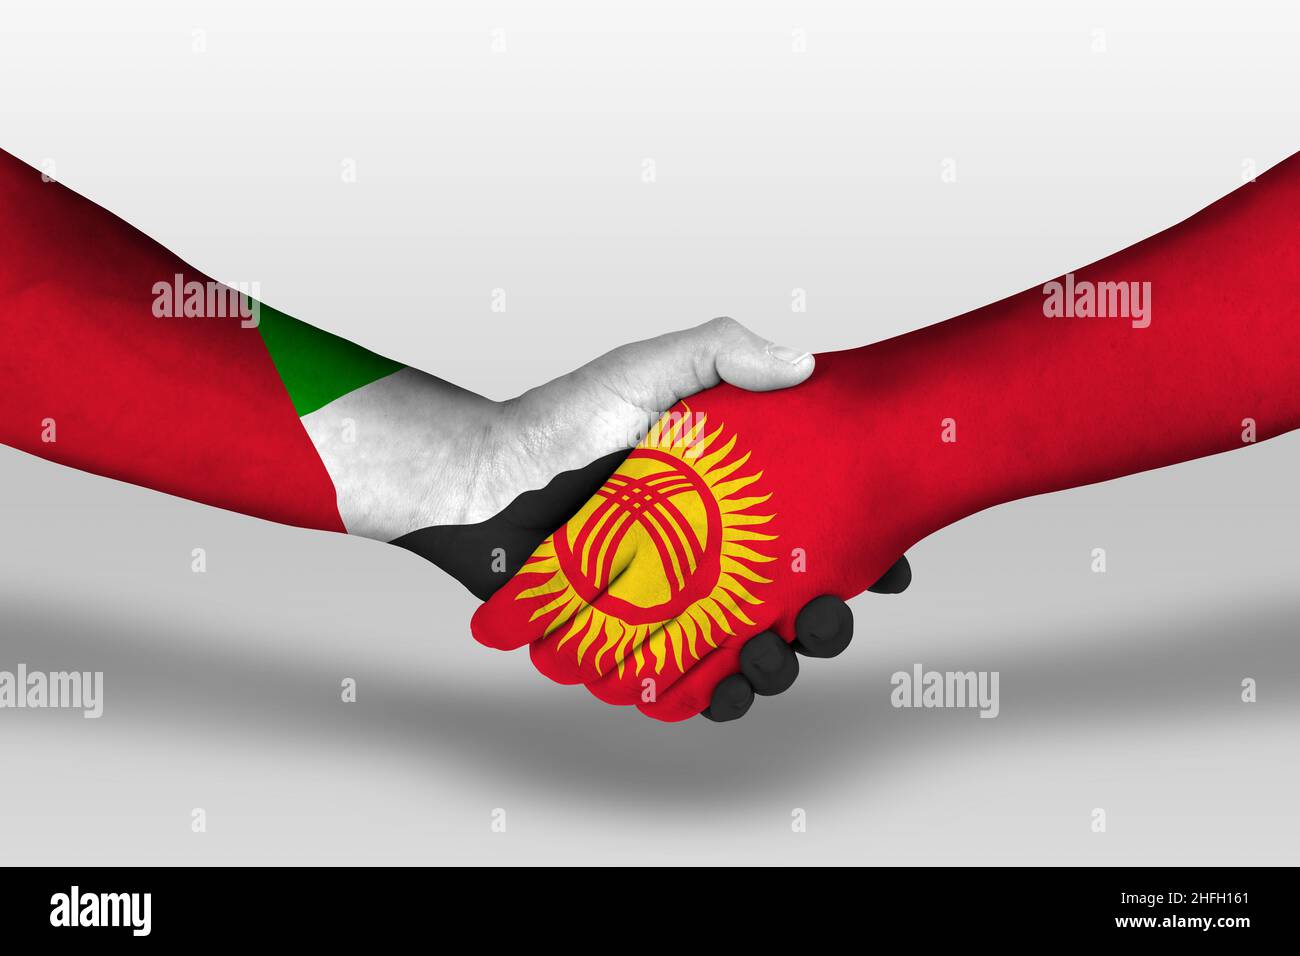 Handshake between kyrgyzstan and united arab emirates flags painted on hands, illustration with clipping path. Stock Photo